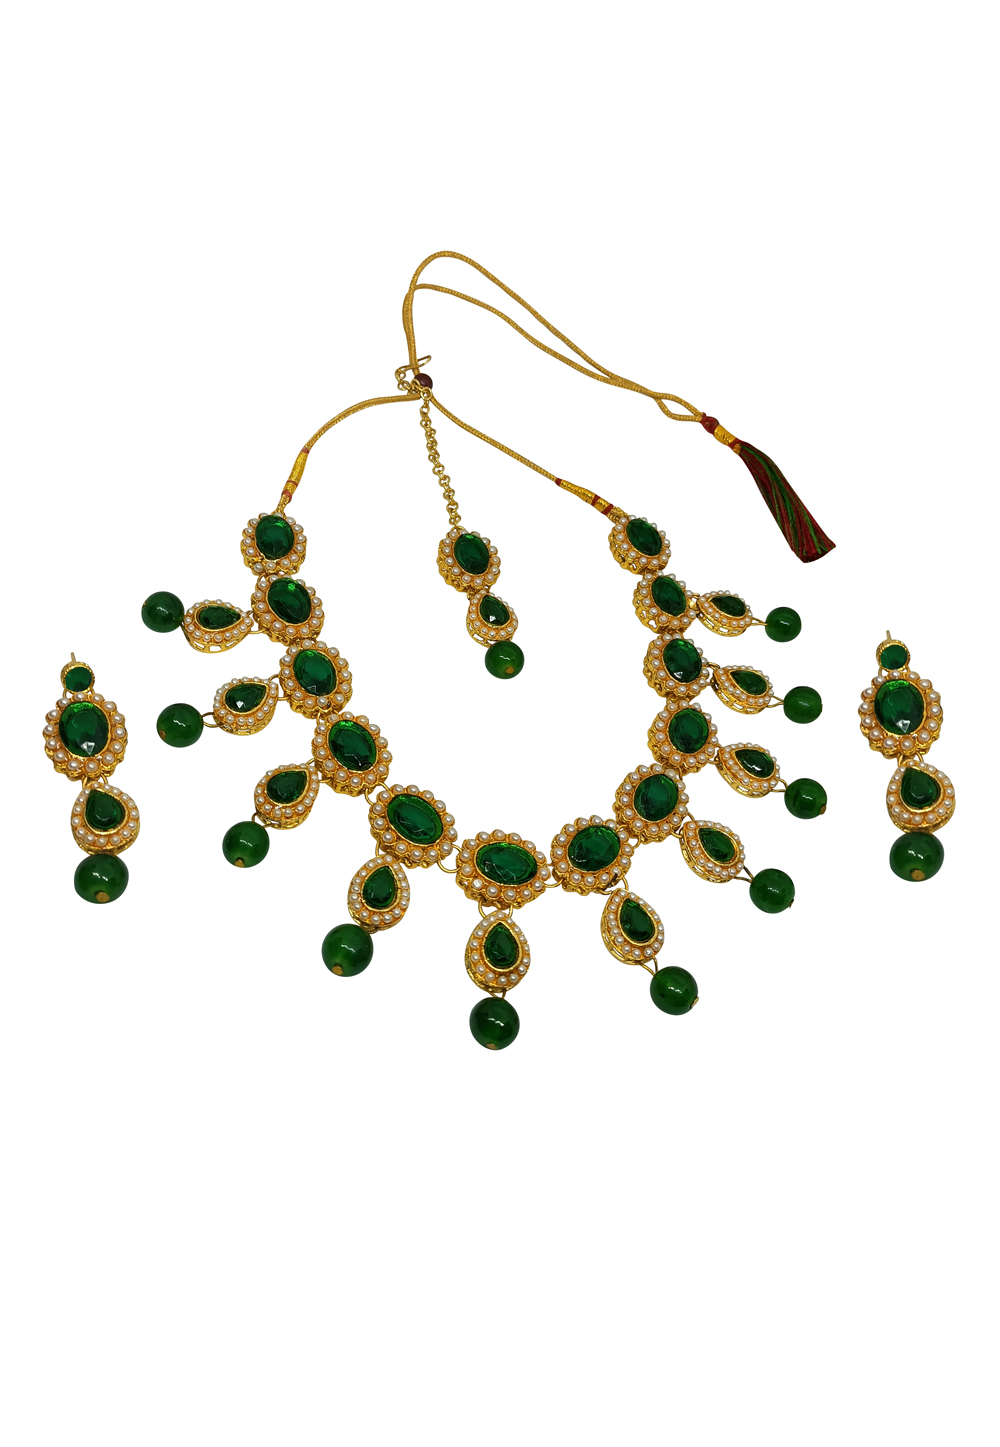 Green Alloy Artificial Stone Necklace Set With Earrings and Maang Tikka 254233